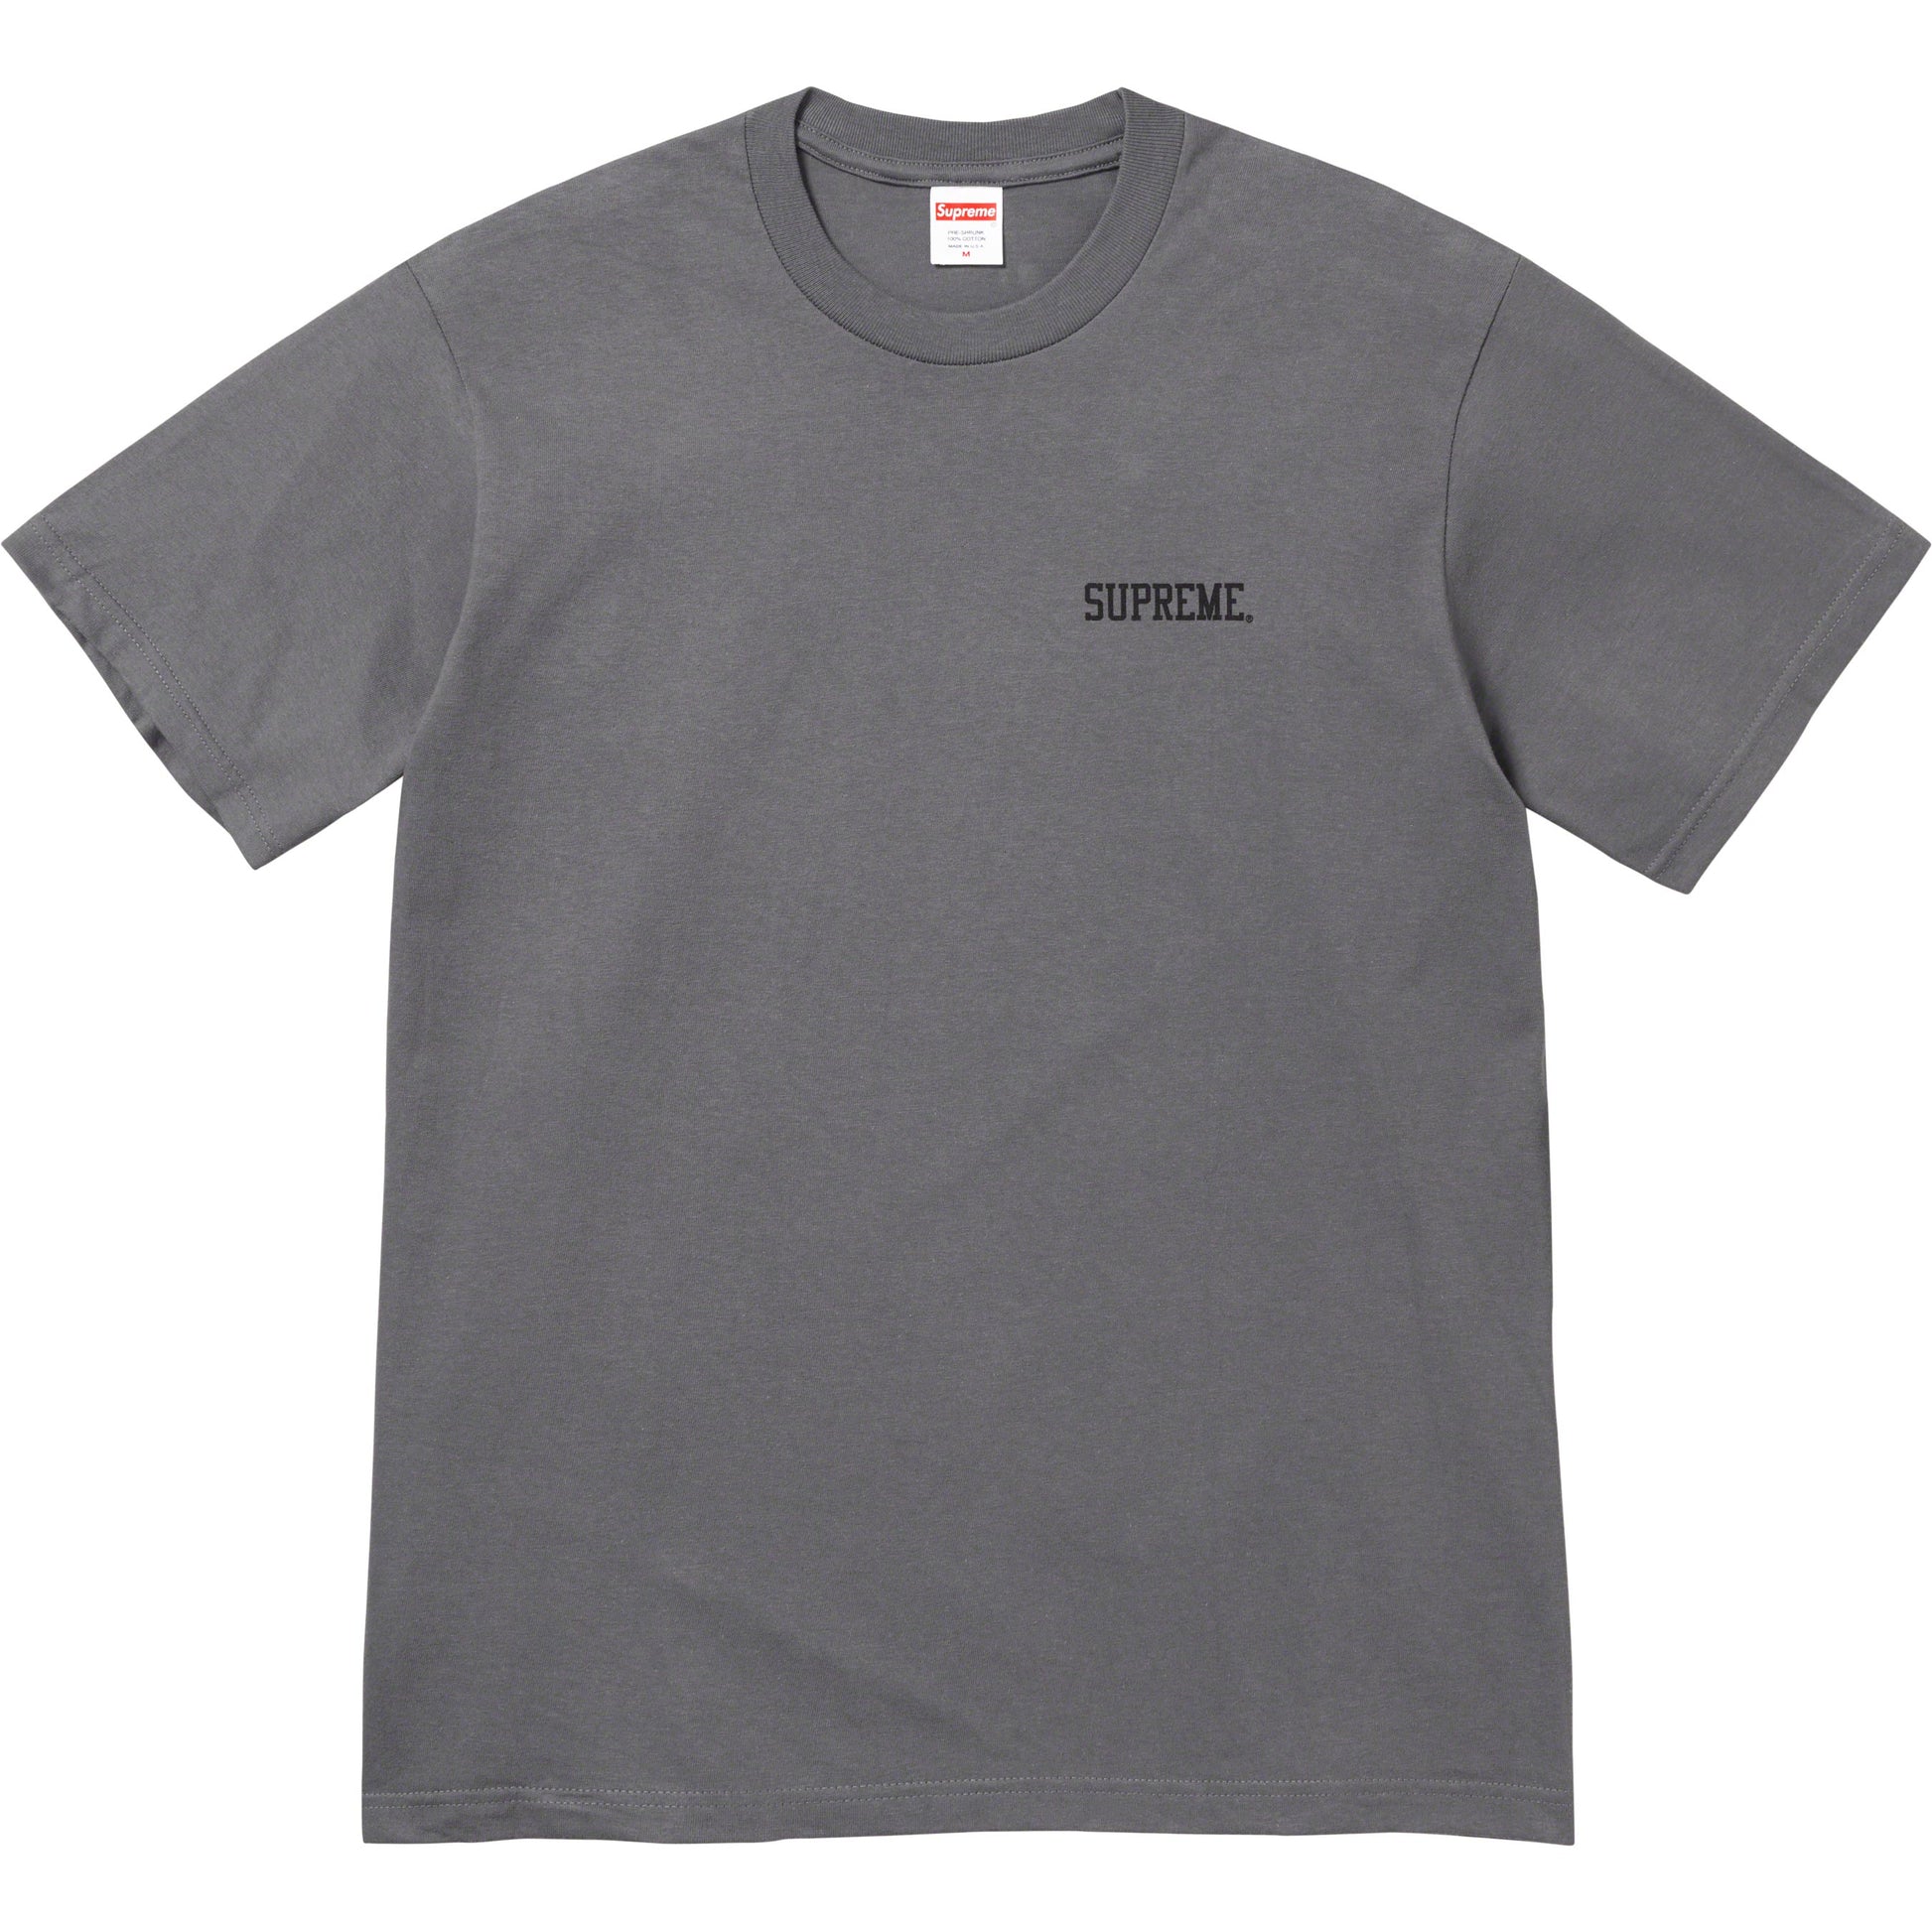 Supreme Fighter Tee Charcoal from Supreme